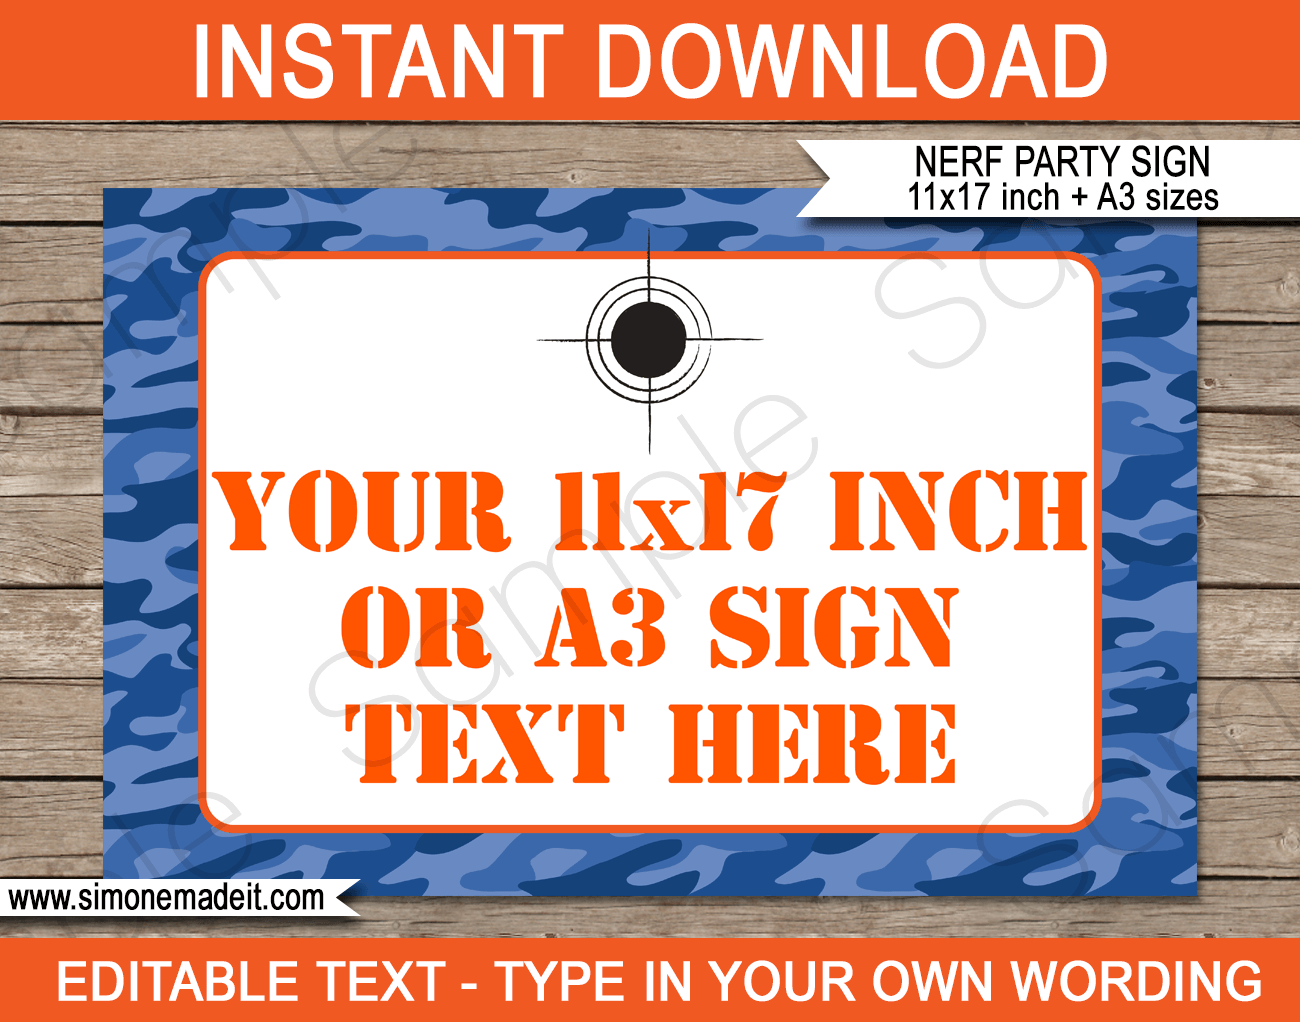 Nerf Birthday Party Signs | Editable & Printable DIY Templates | Party Decorations | Tabloid / Ledger 11x17 inches | A3 | $4.00 Instant Download via SIMONEmadeit.com